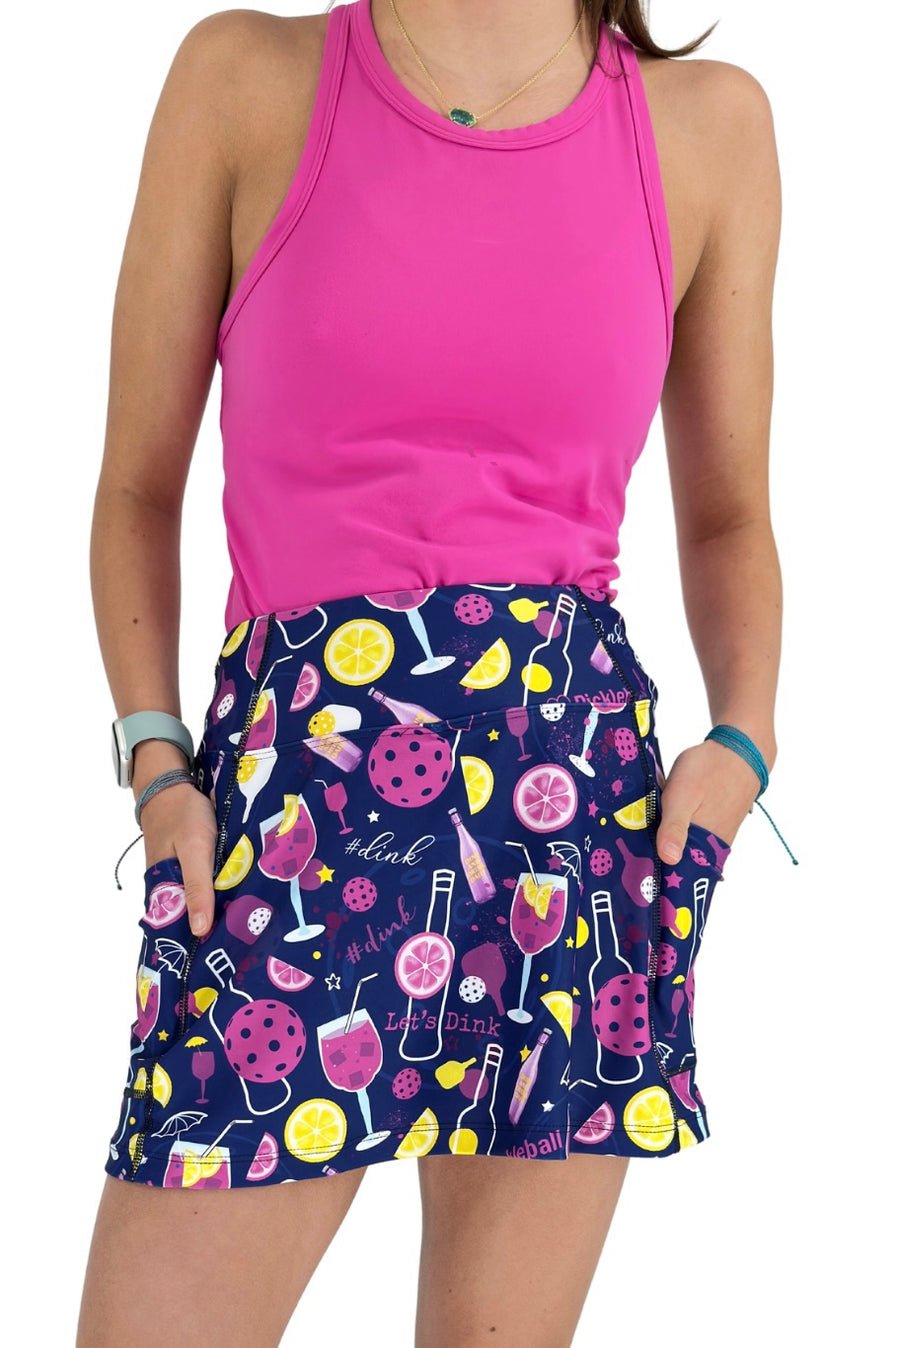 Queen of the Court - Pickleball Dinks & Drinks 15" Skort: Multi - Shorely Chic Boutique